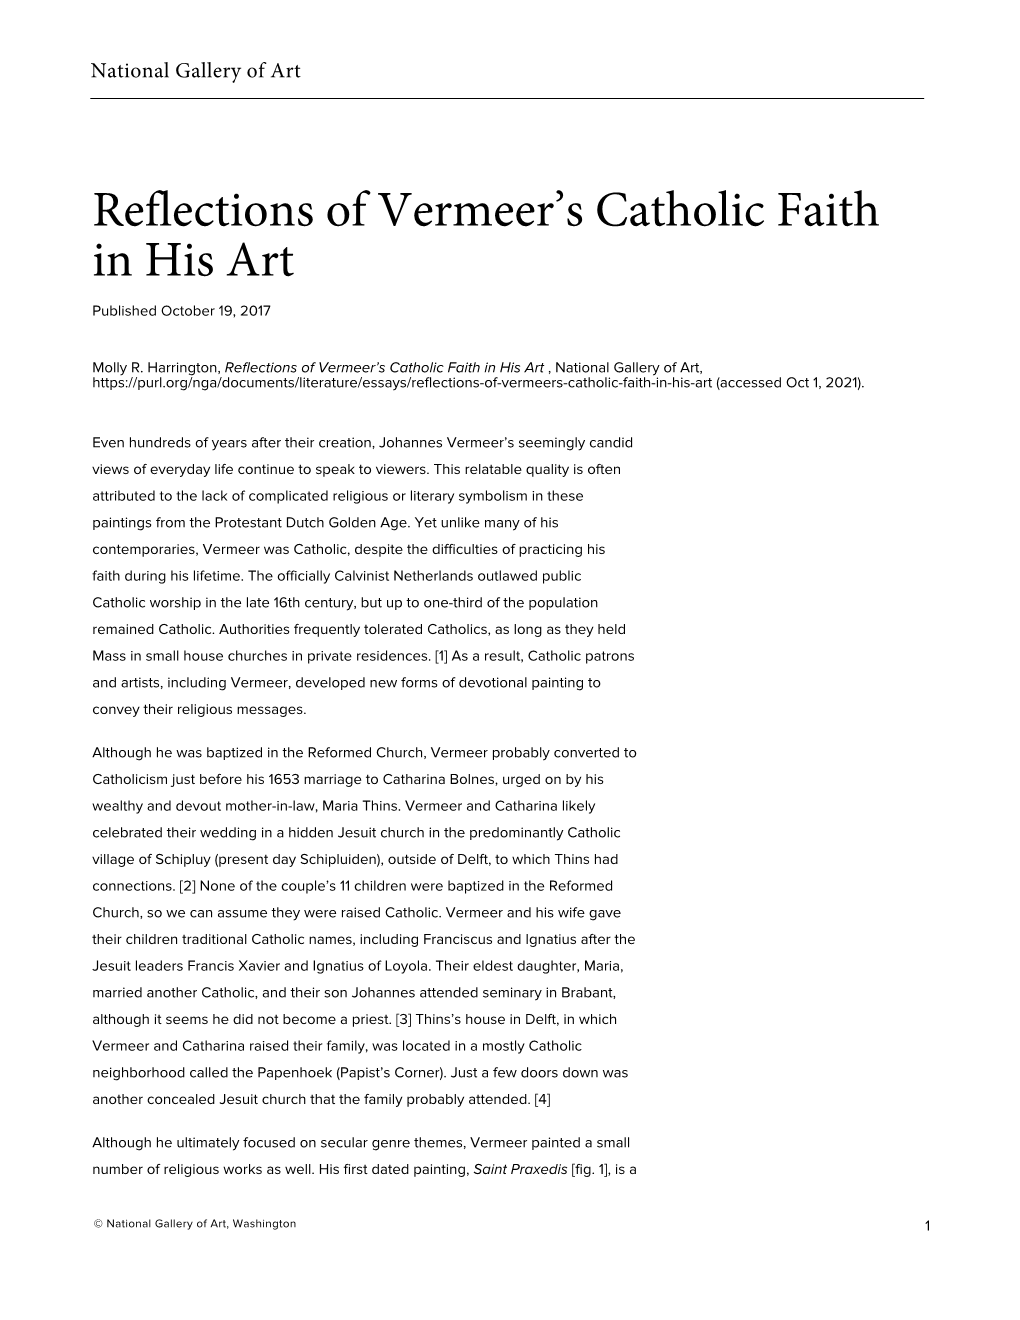 Reflections of Vermeer's Catholic Faith in His